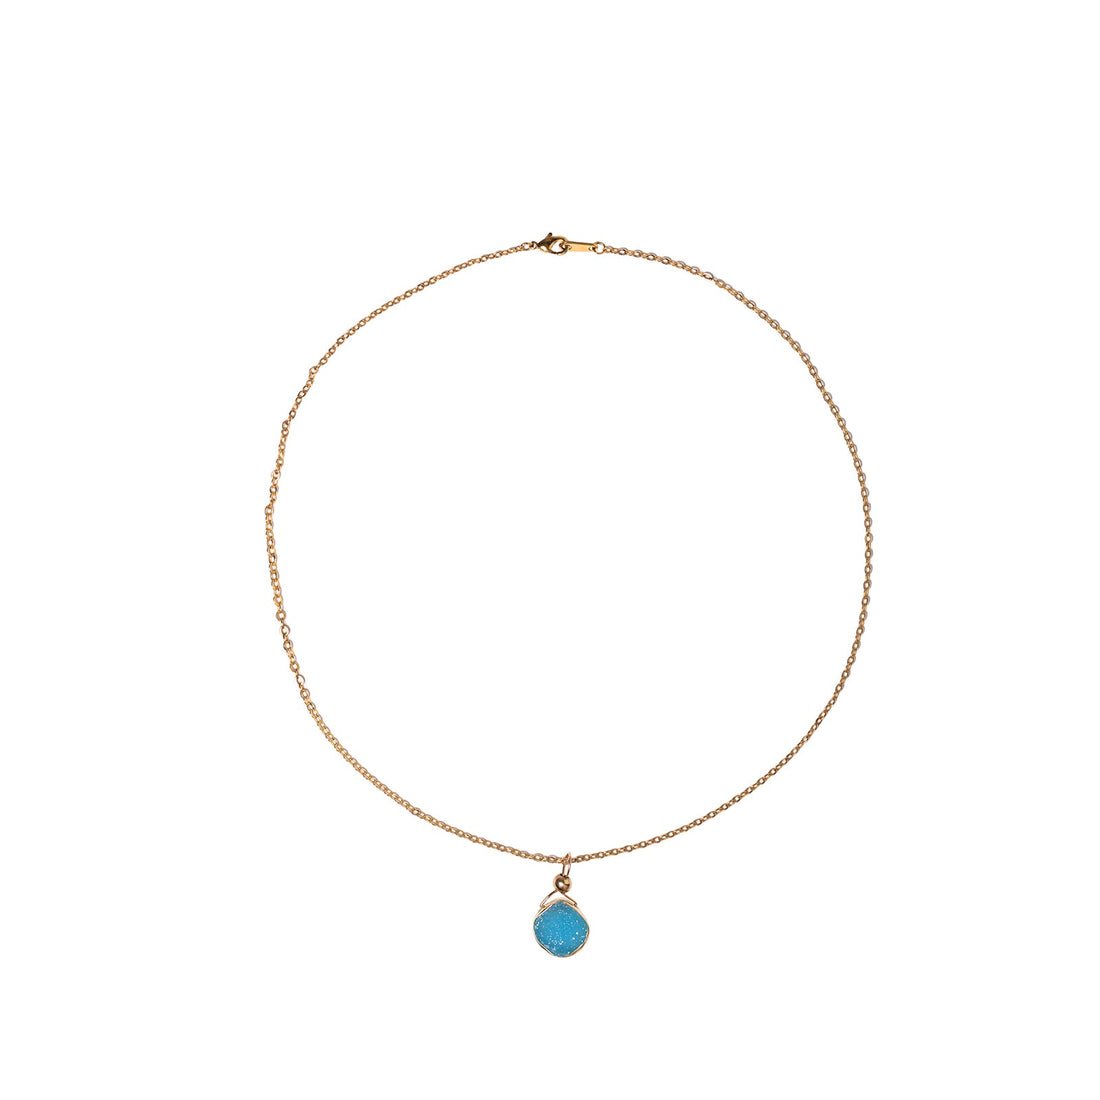 Julianna Pendant with Blue Druzy in Gold- Classic Pear Cut Necklaces Sayulita Sol 16 inch Gold Plate Chain 